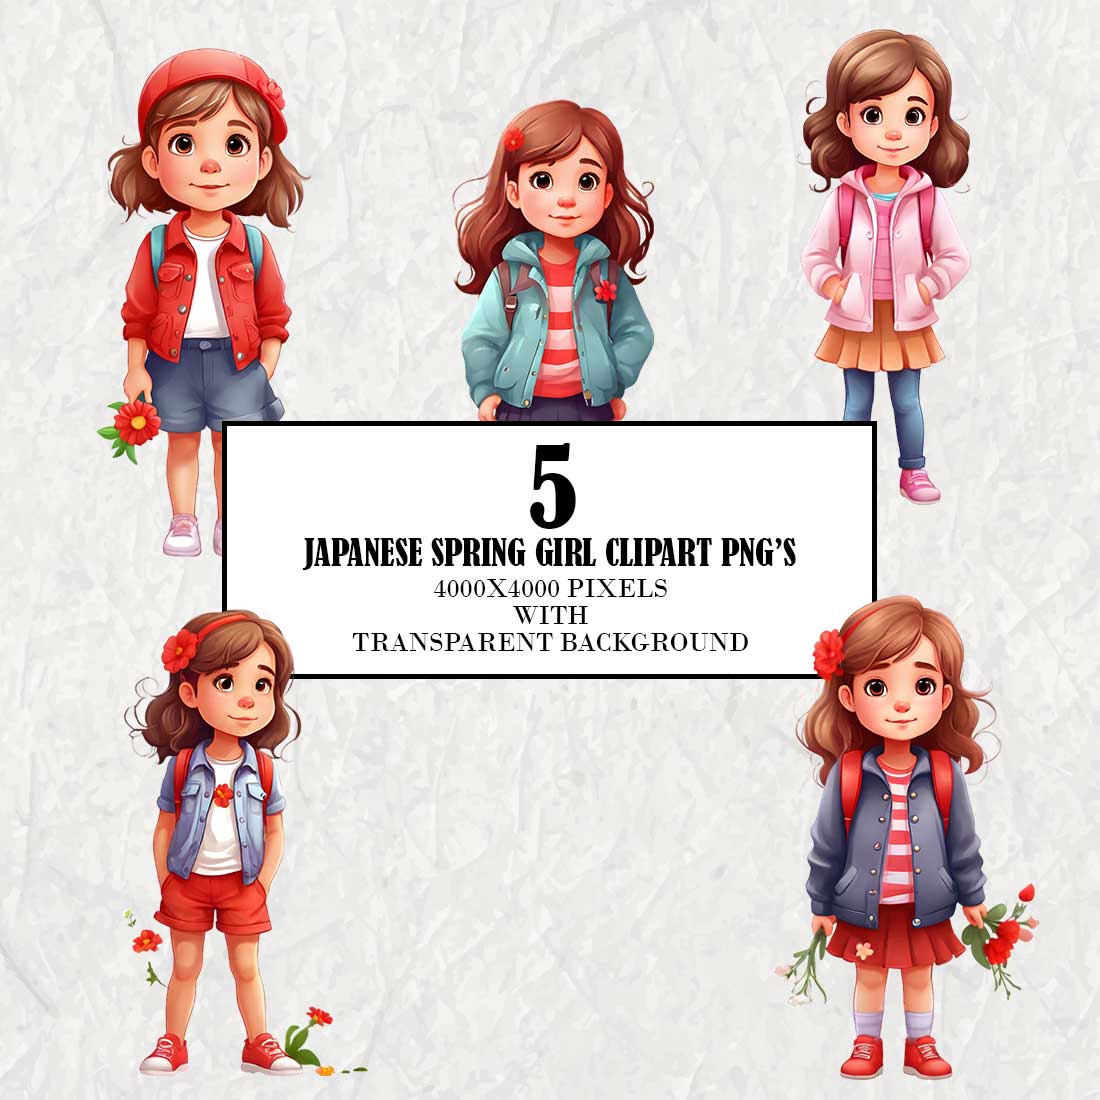 Japanese Spring Girl Clipart cover image.